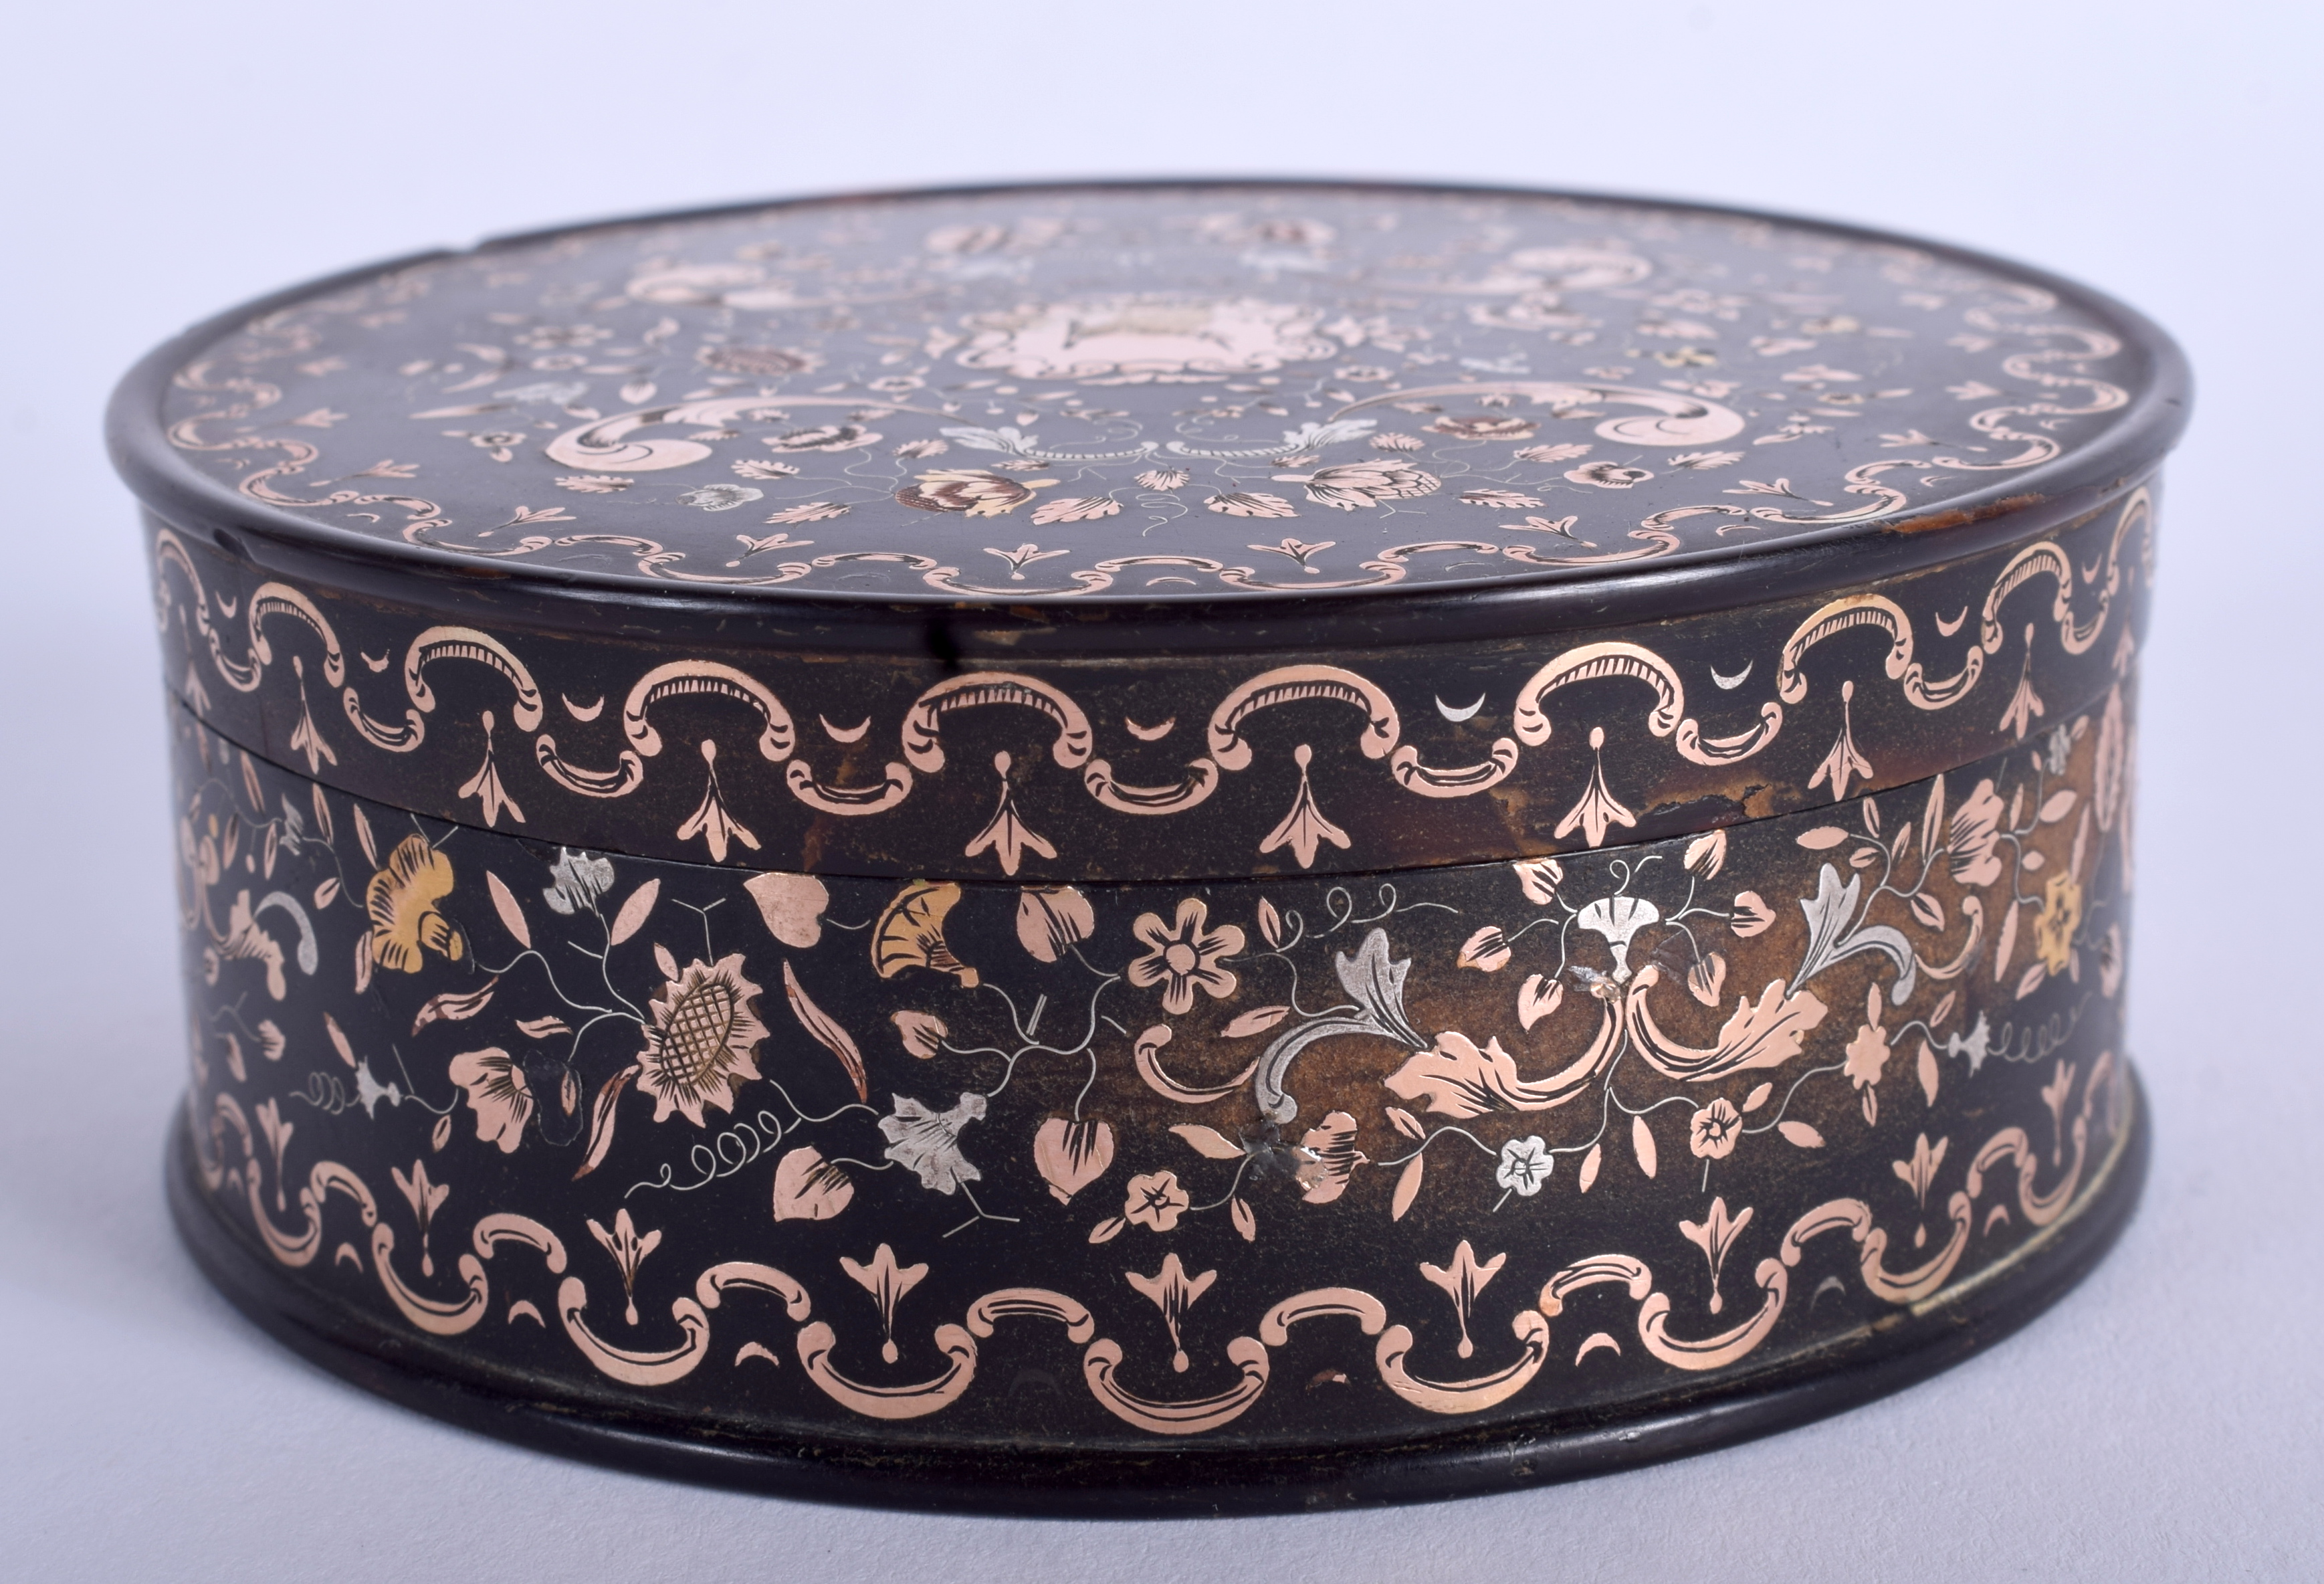 A GOOD GEORGEIII GOLD INLAID PIQUE WORK TORTOISESHELL BOX AND COVER decorated with foliage. 9 cm x